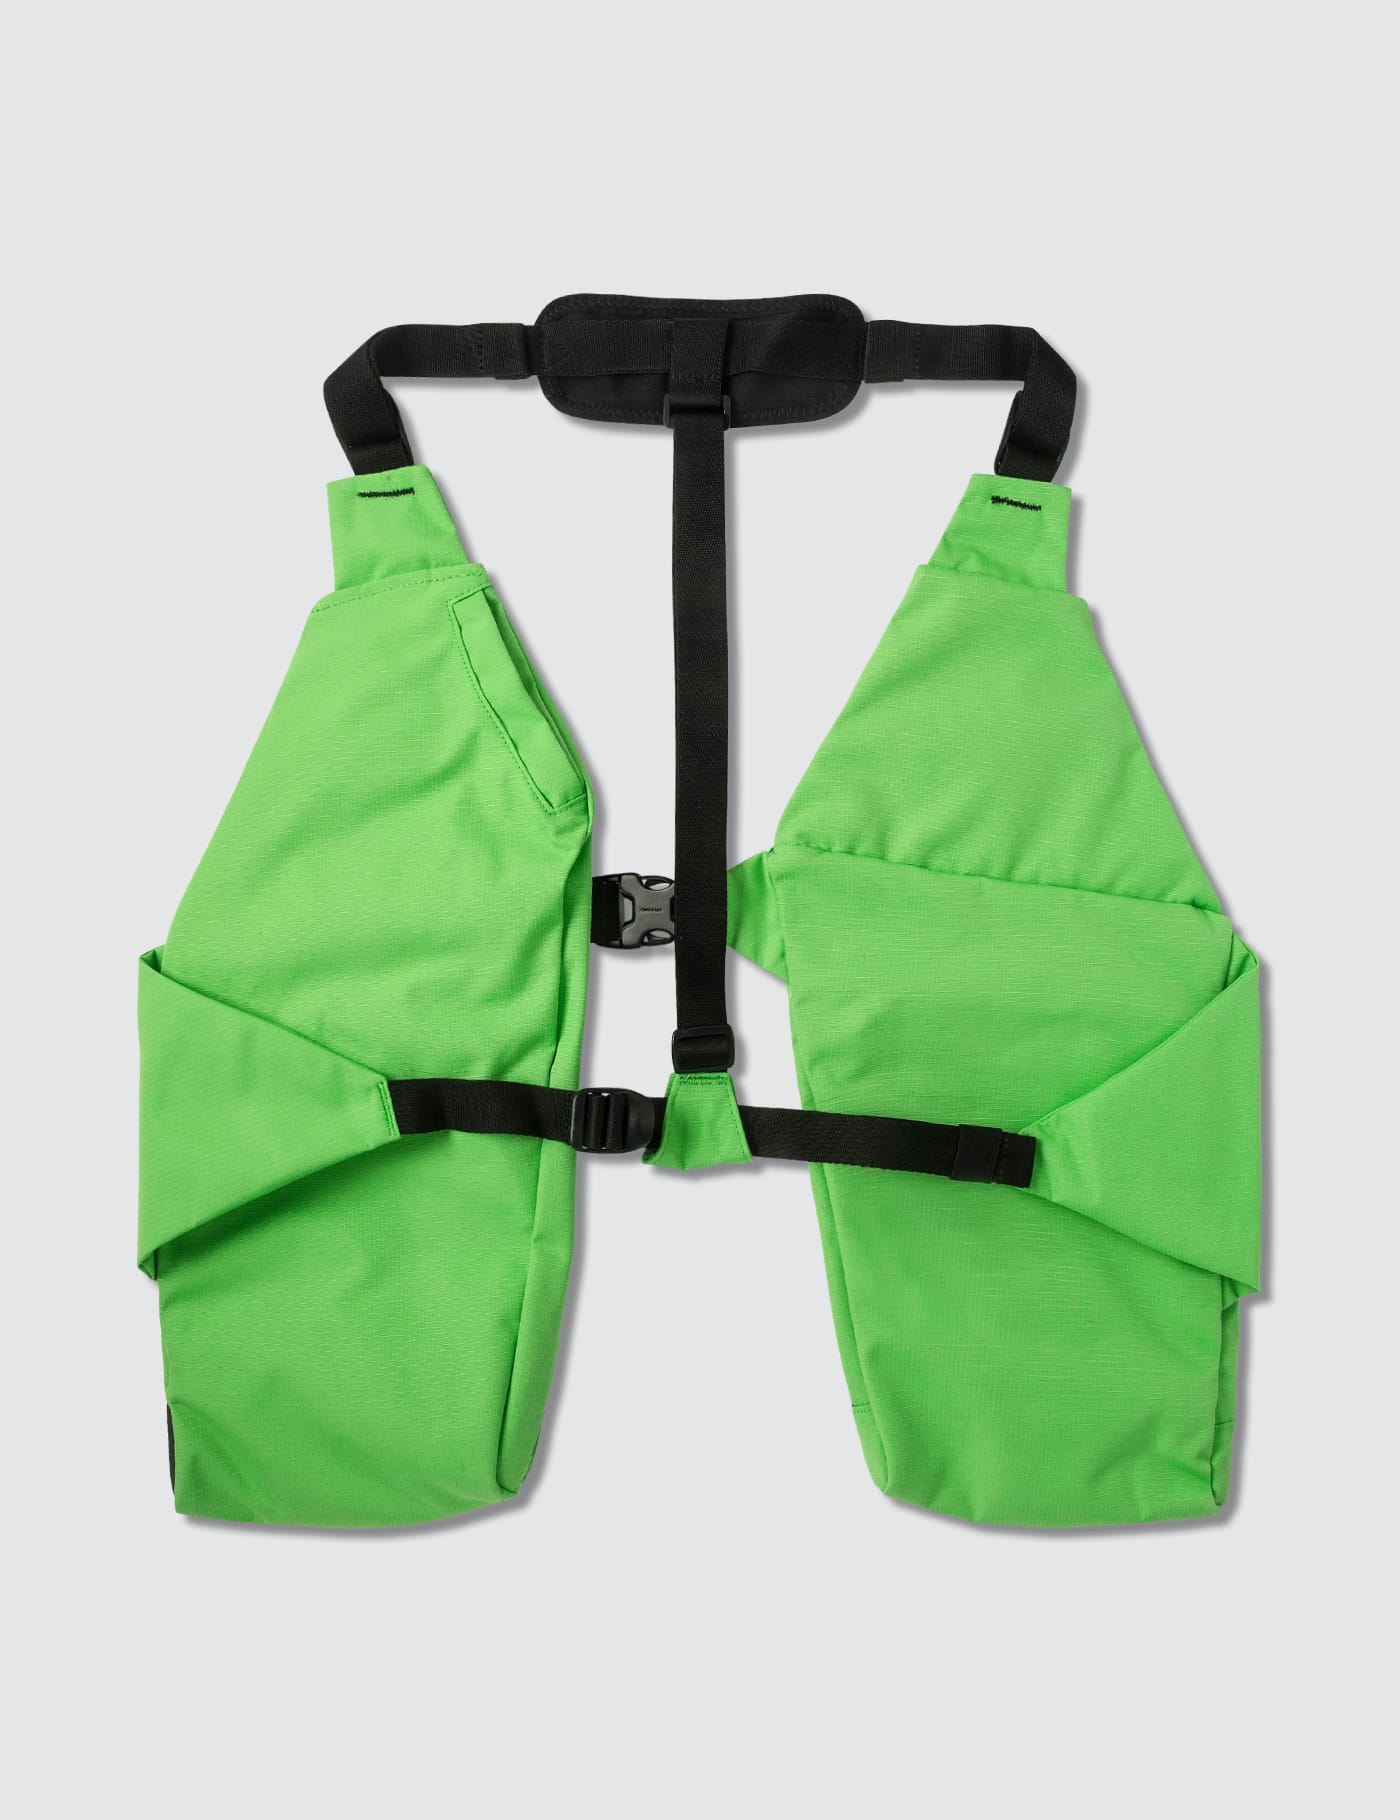 Oakley - Body Bag Vest Bag | HBX - Globally Curated Fashion and